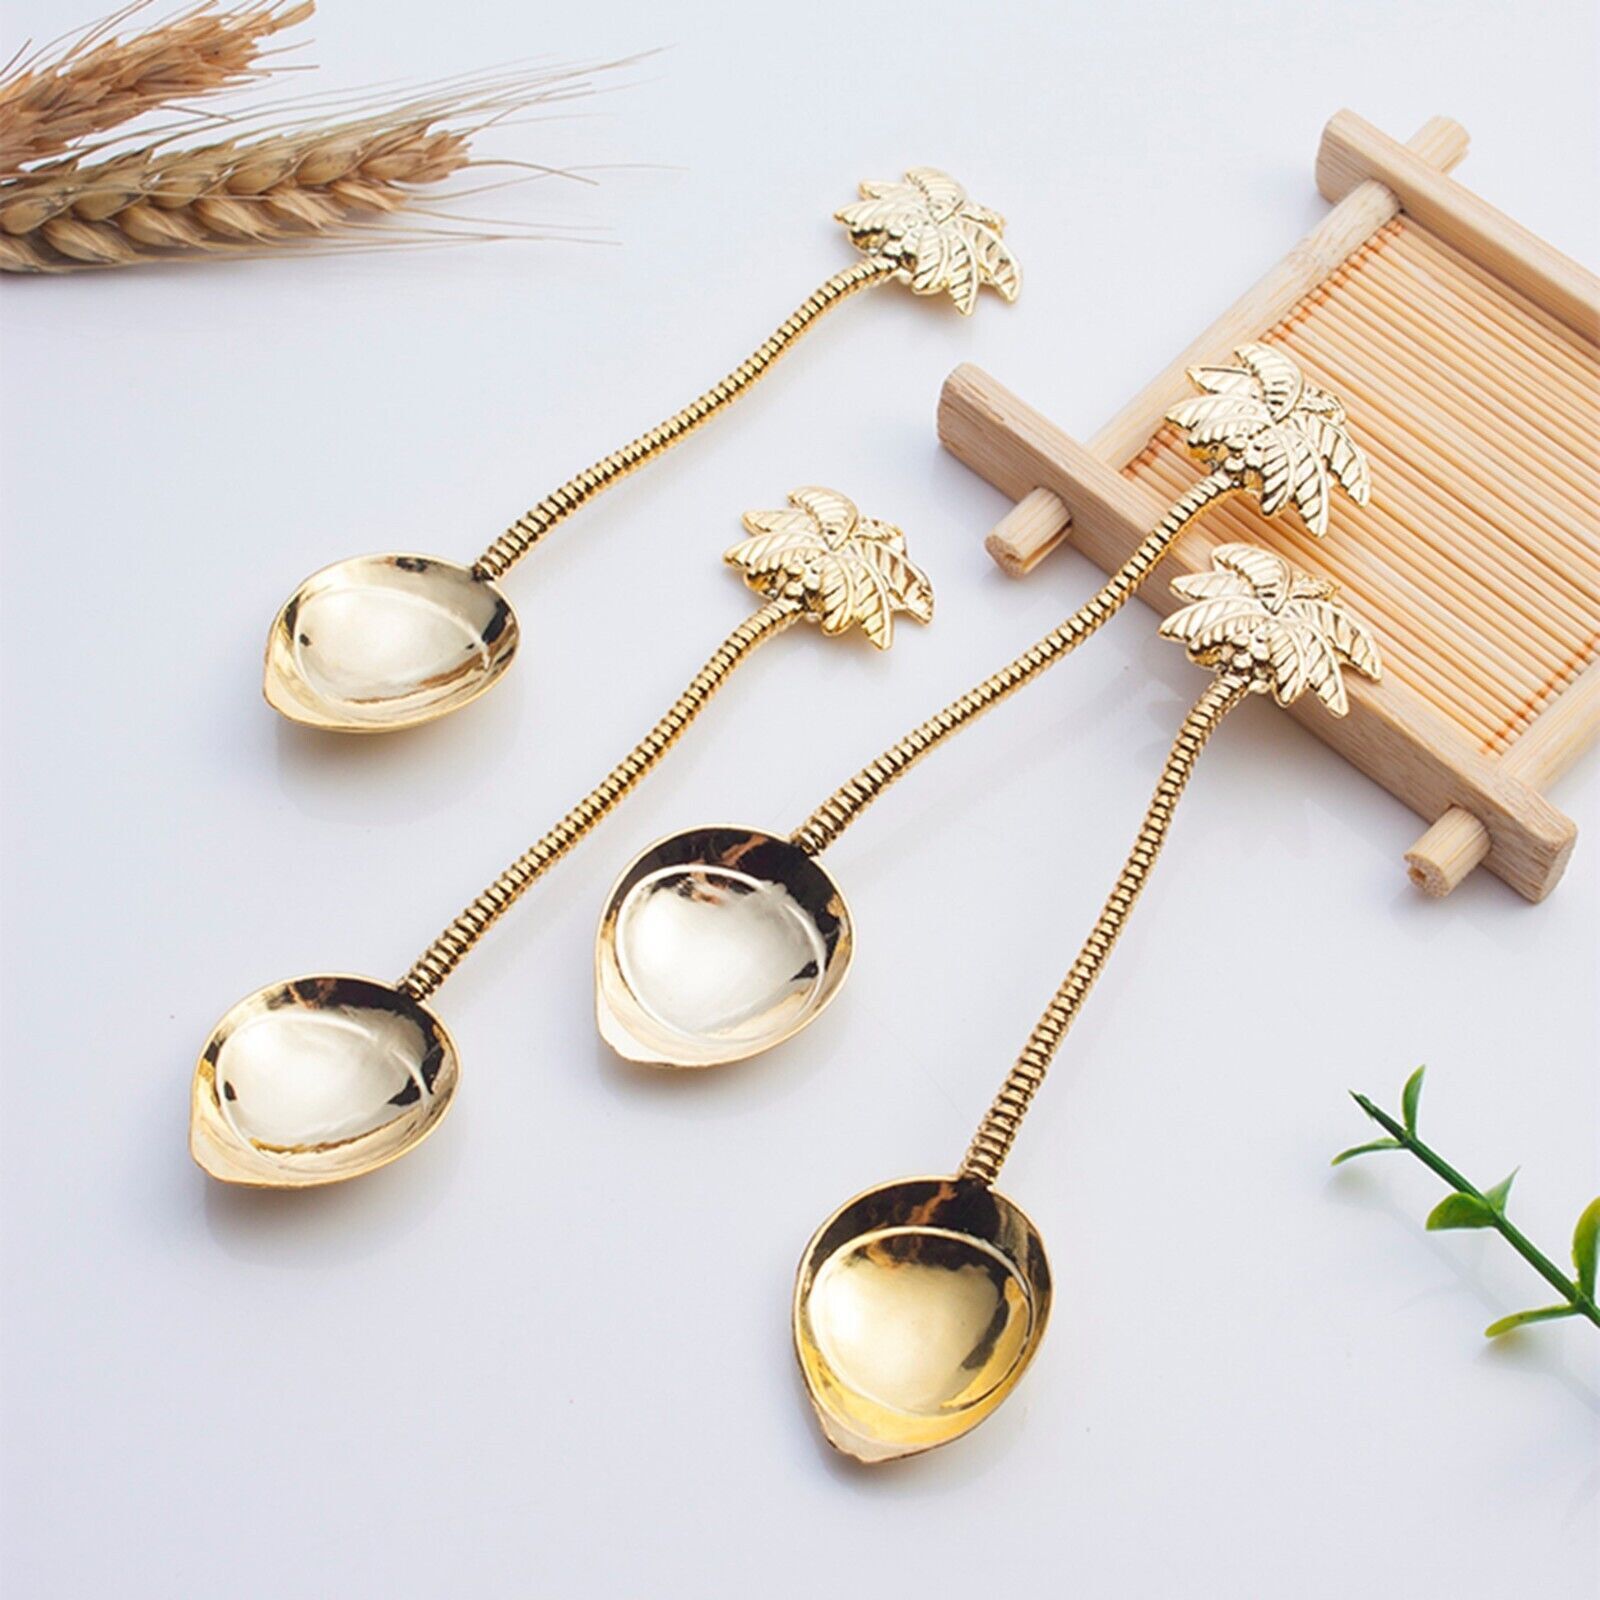 Teaspoon Set of 6 pcs Golden Stainless Steel High Quality Palm Design Gift Box